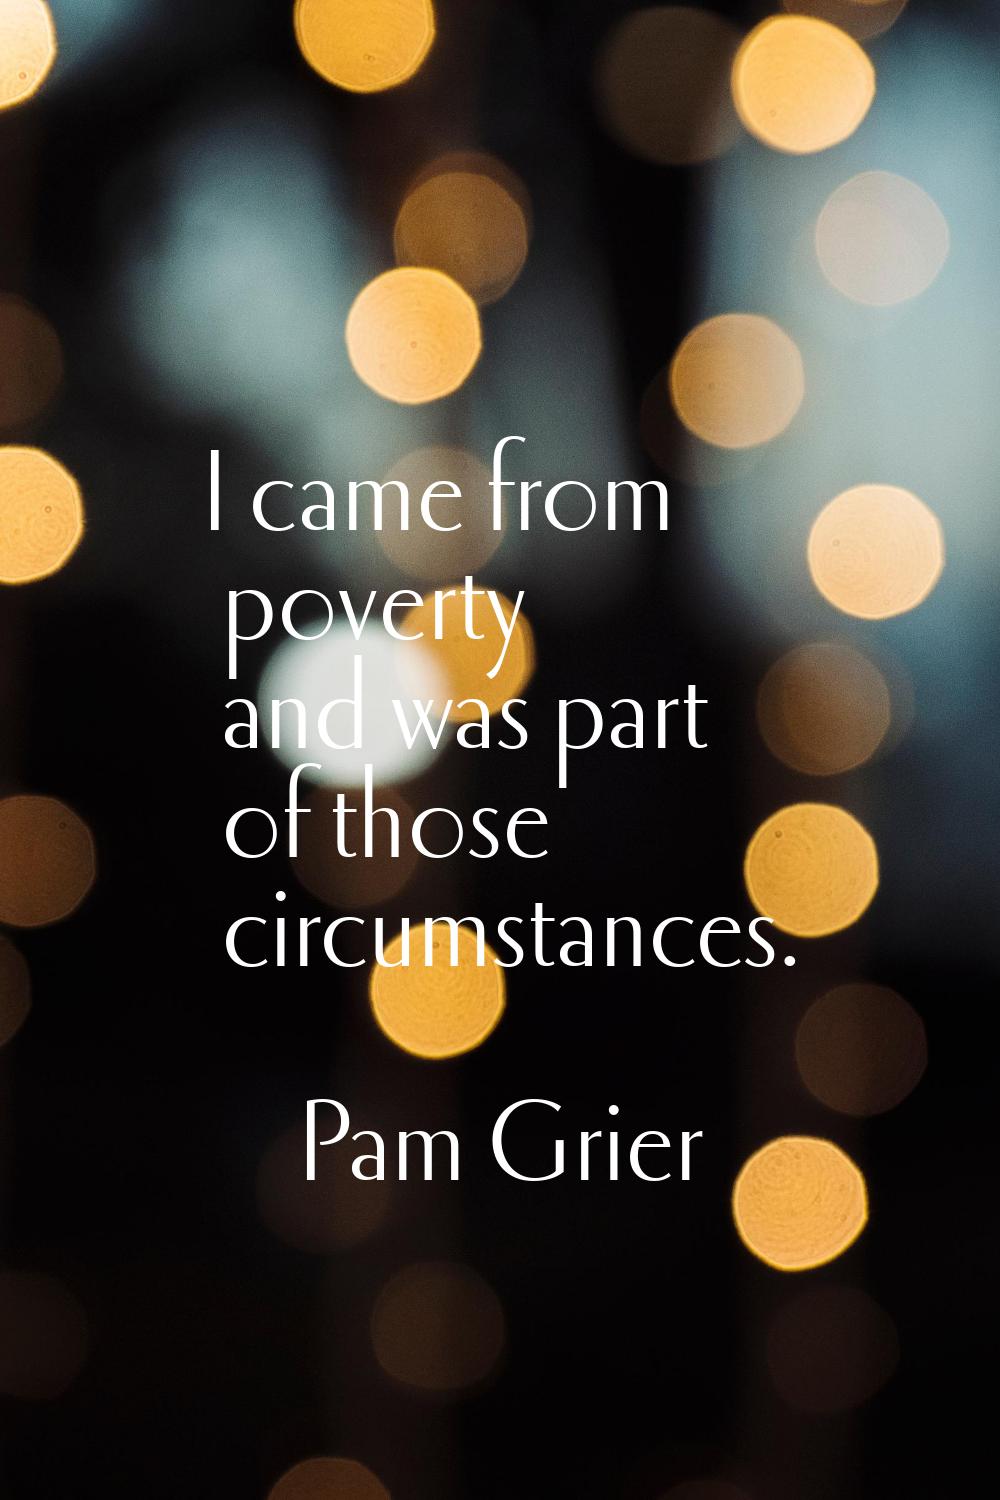 I came from poverty and was part of those circumstances.